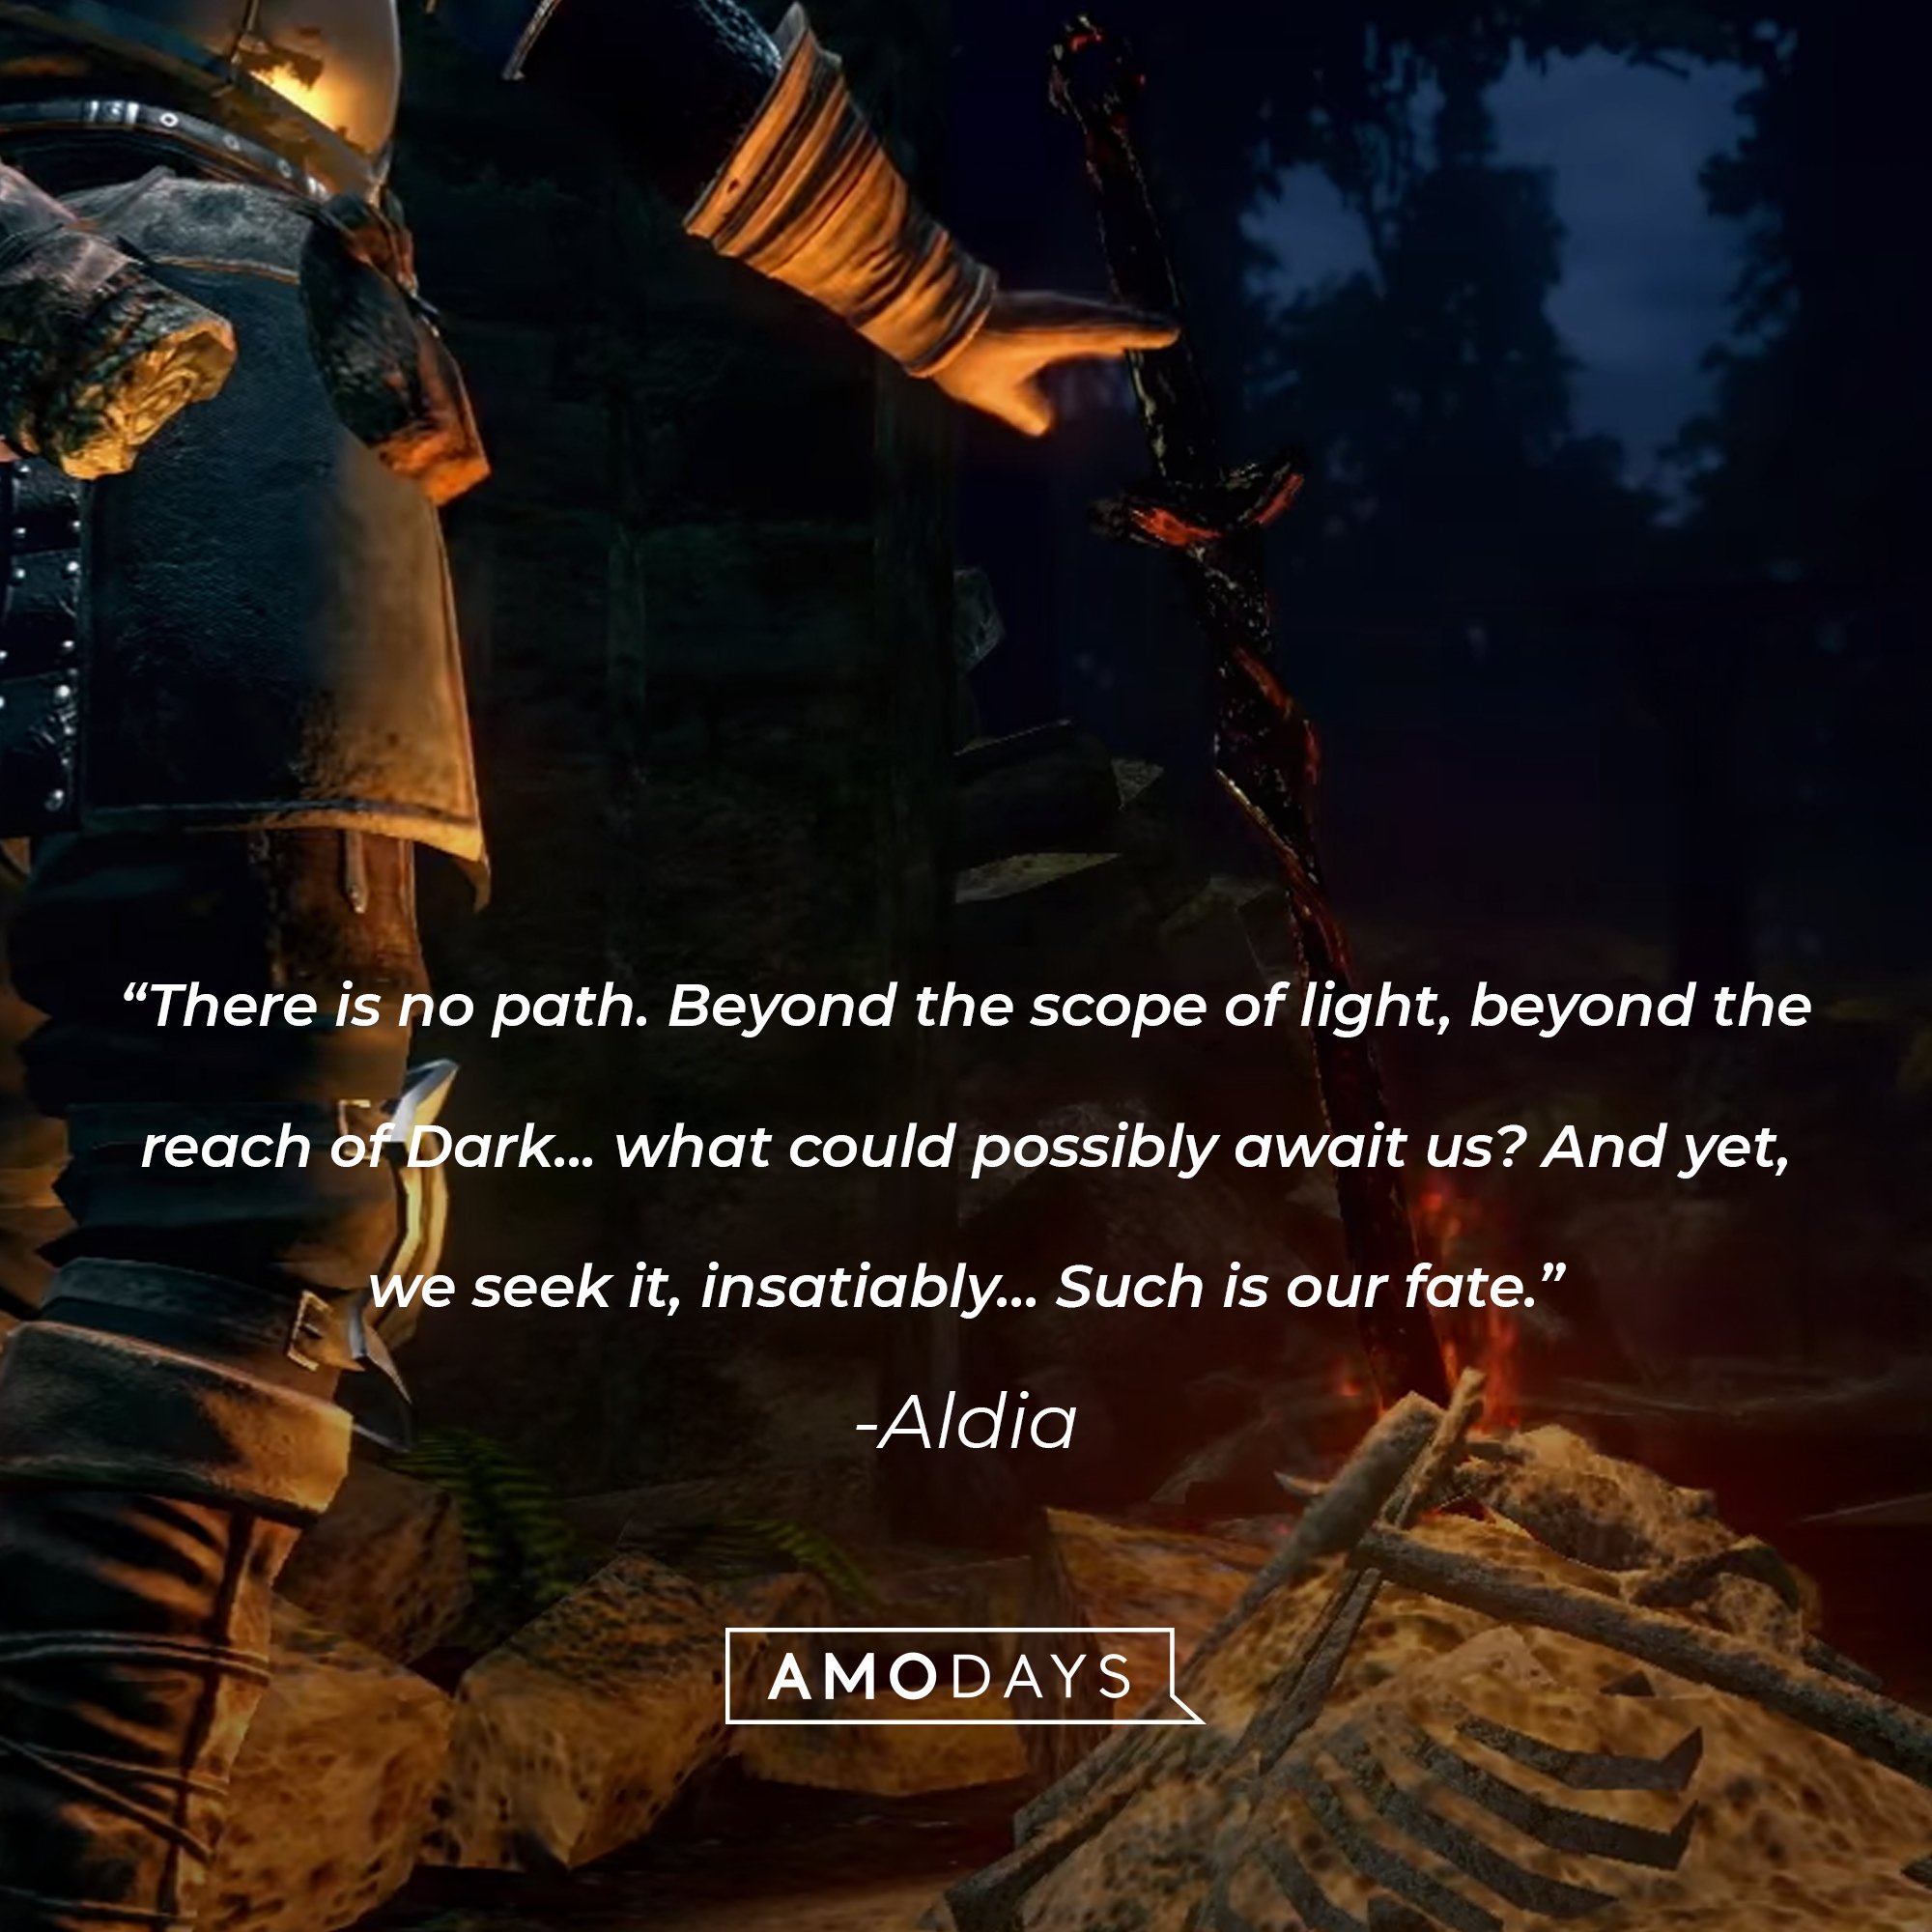 Aldia’s quote: "There is no path. Beyond the scope of light, beyond the reach of Dark... what could possibly await us? And yet, we seek it, insatiably... Such is our fate."  | Image: AmoDays